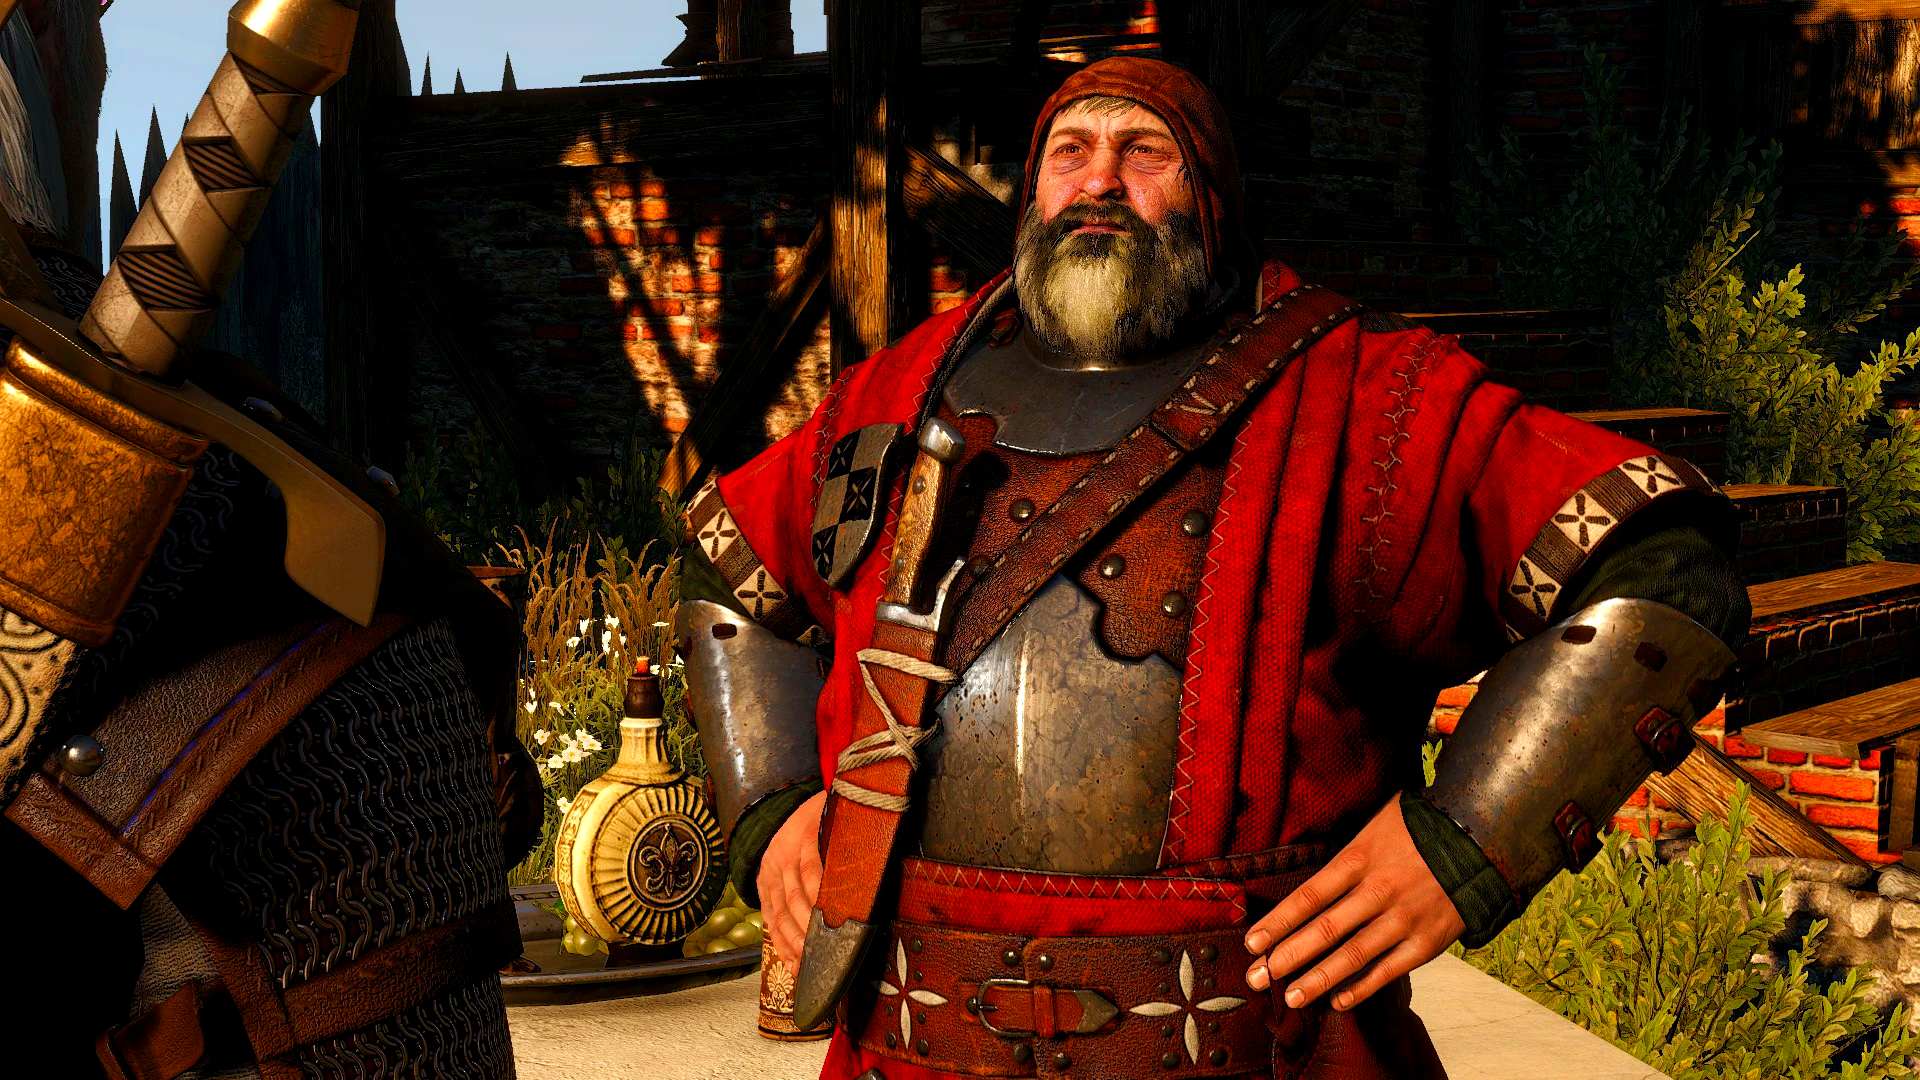 The Baron - a video game NPC from The Witcher 3: Wild Hunt